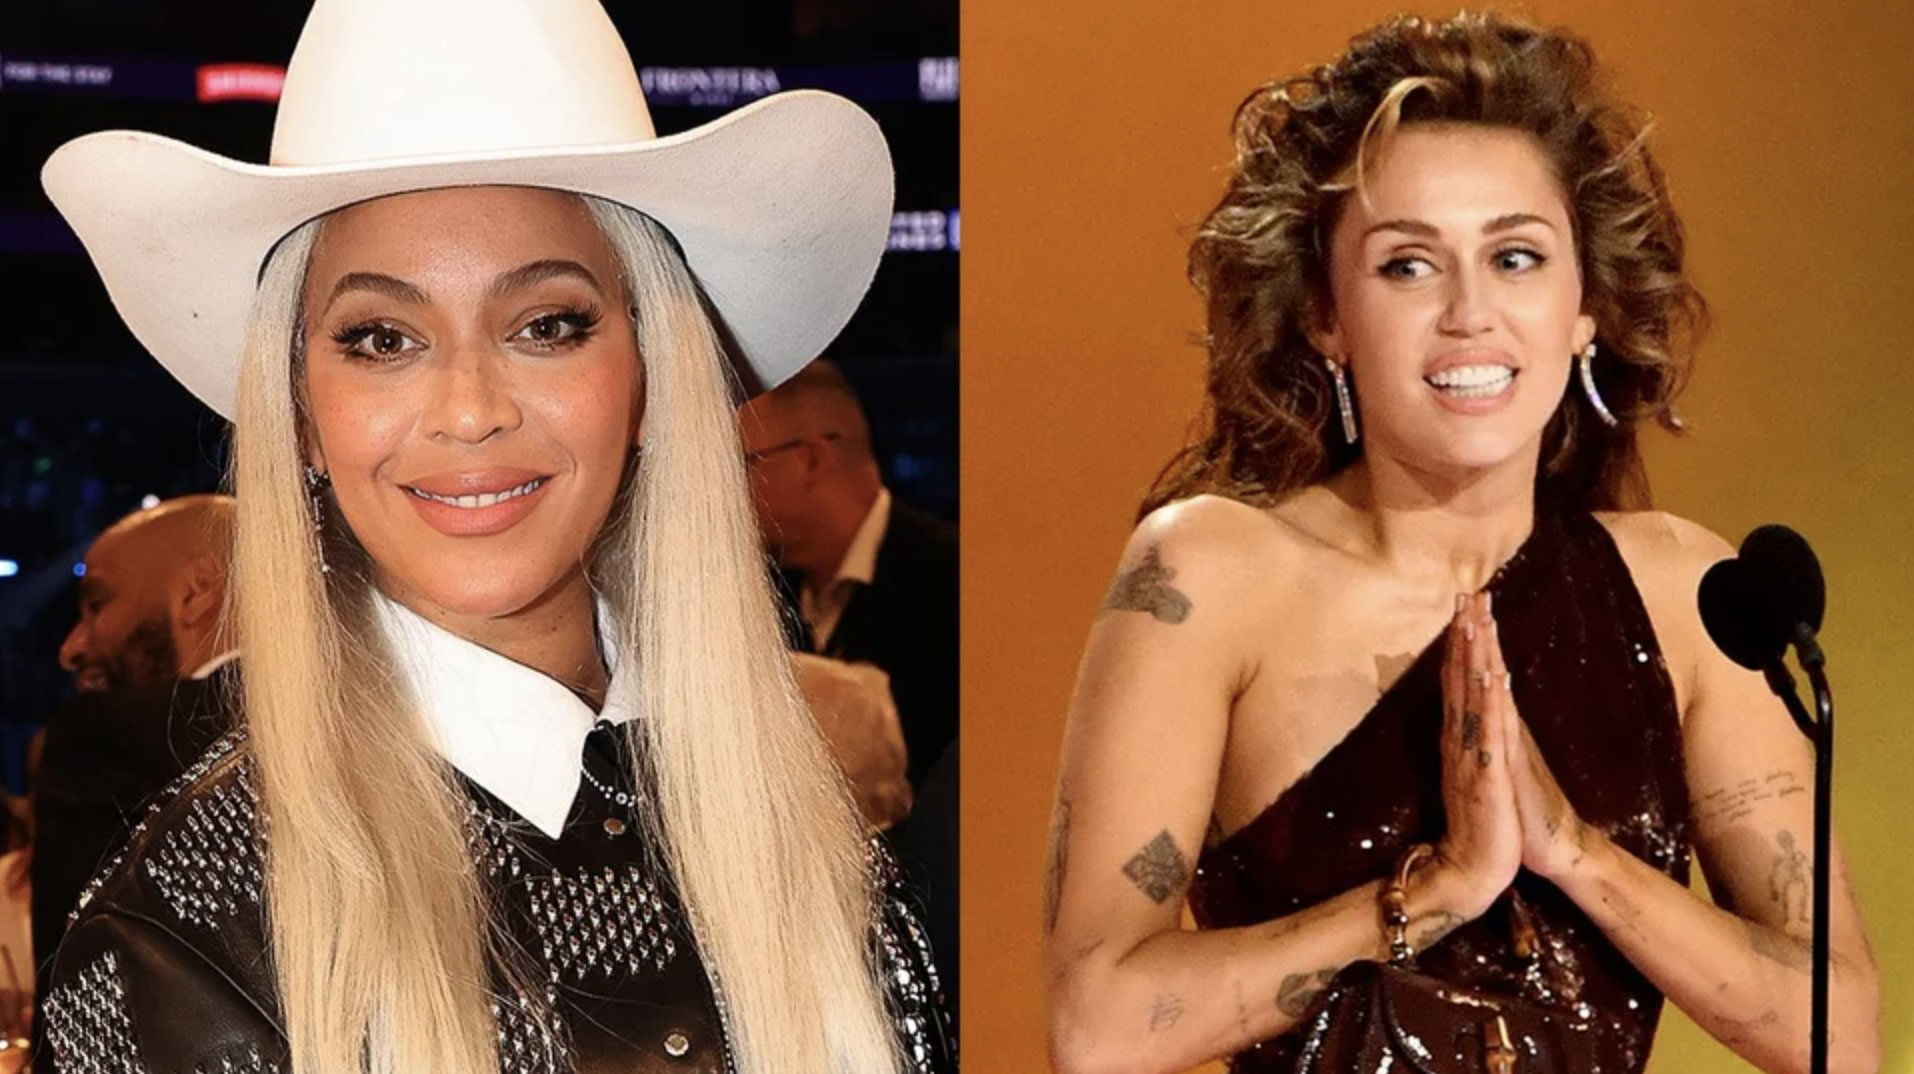 Miley Cyrus Extends Heartfelt Thanks to Beyoncé, ‘Cowboy Carter’ Collaboration Strengthens Bonds of Respect and Admiration.